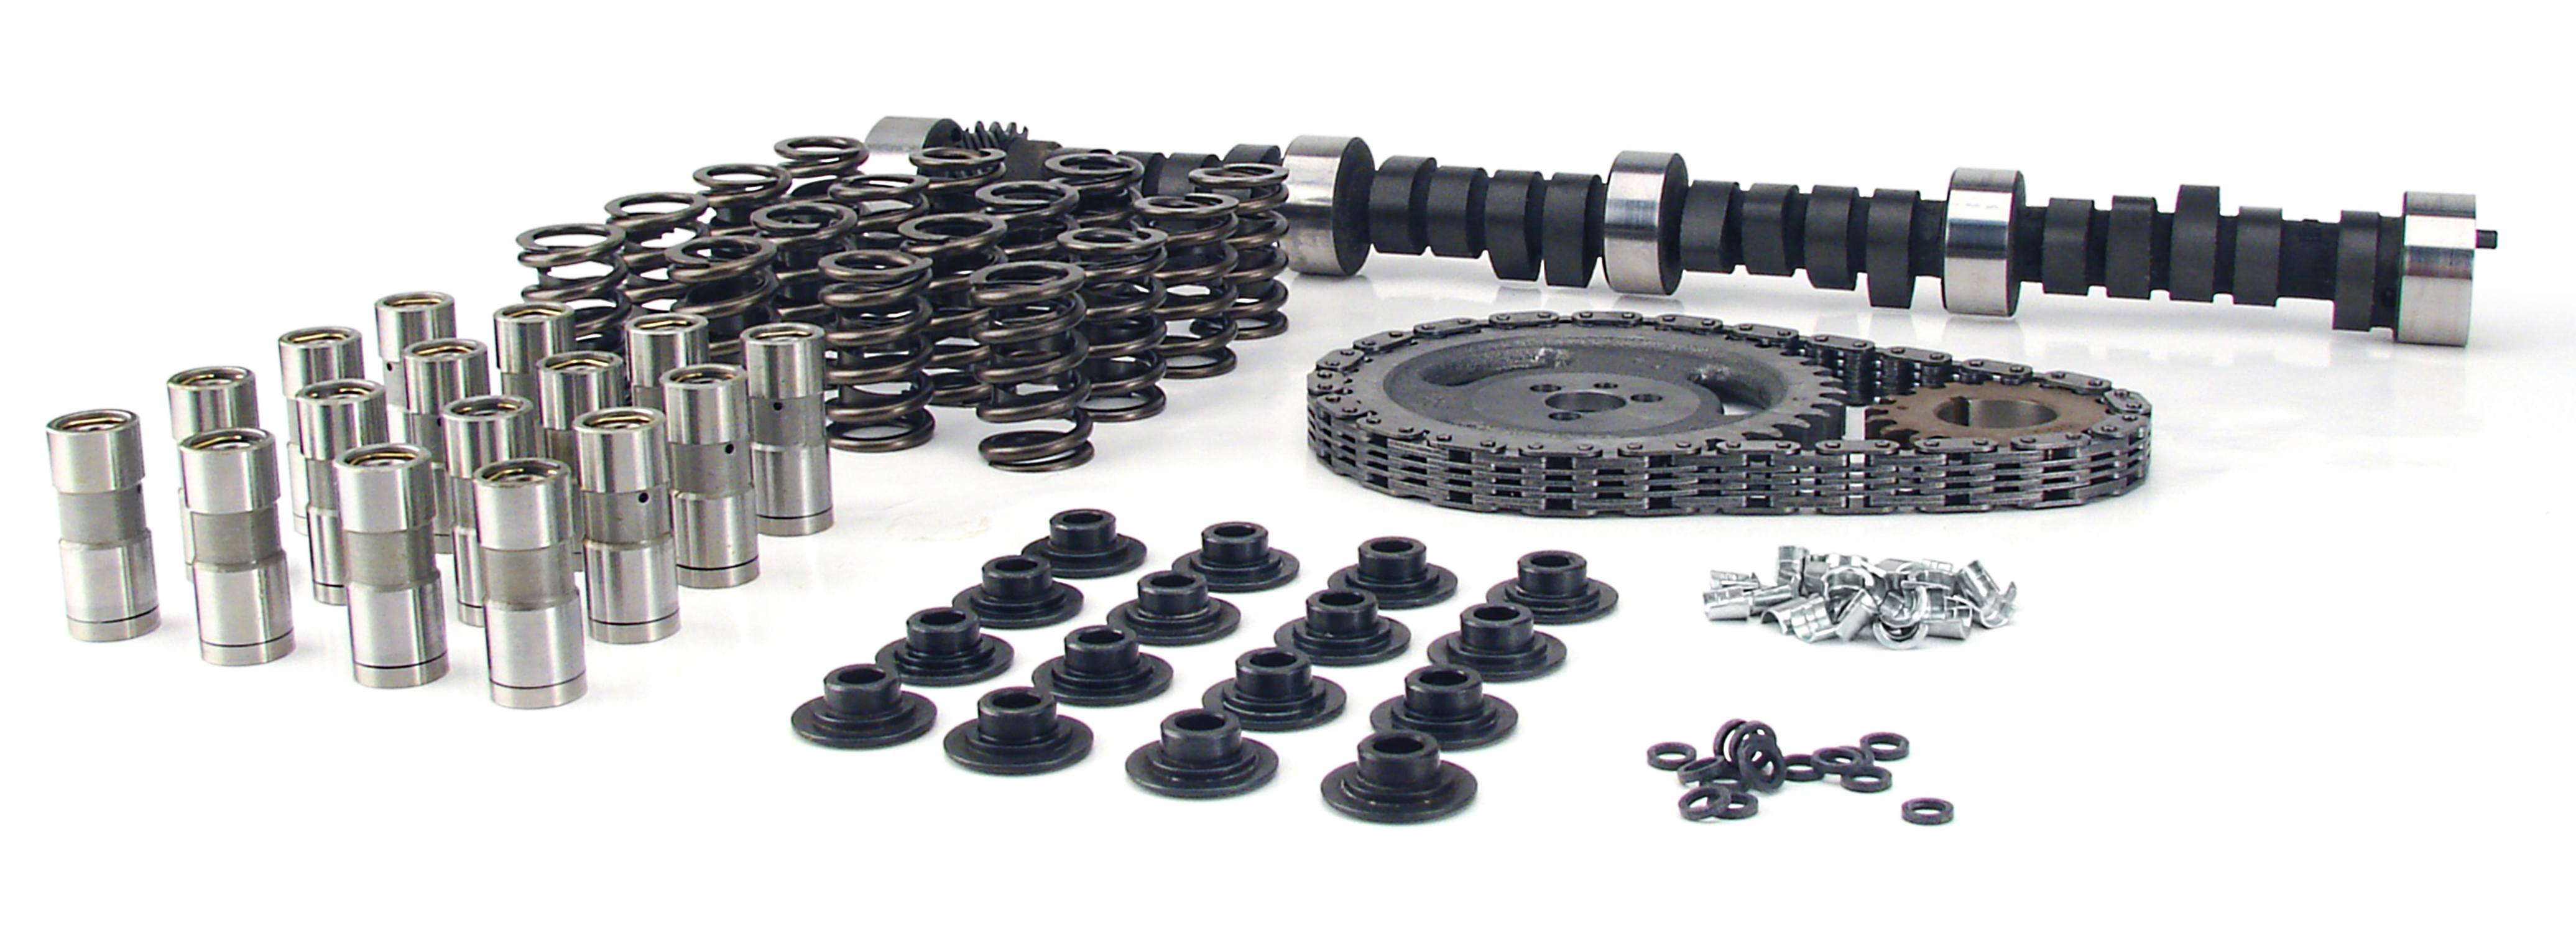 Set of 16 Single Springs w/ 1.254" O.D., 1.254" I.D., 1.700" Installed Height - K12-552-4